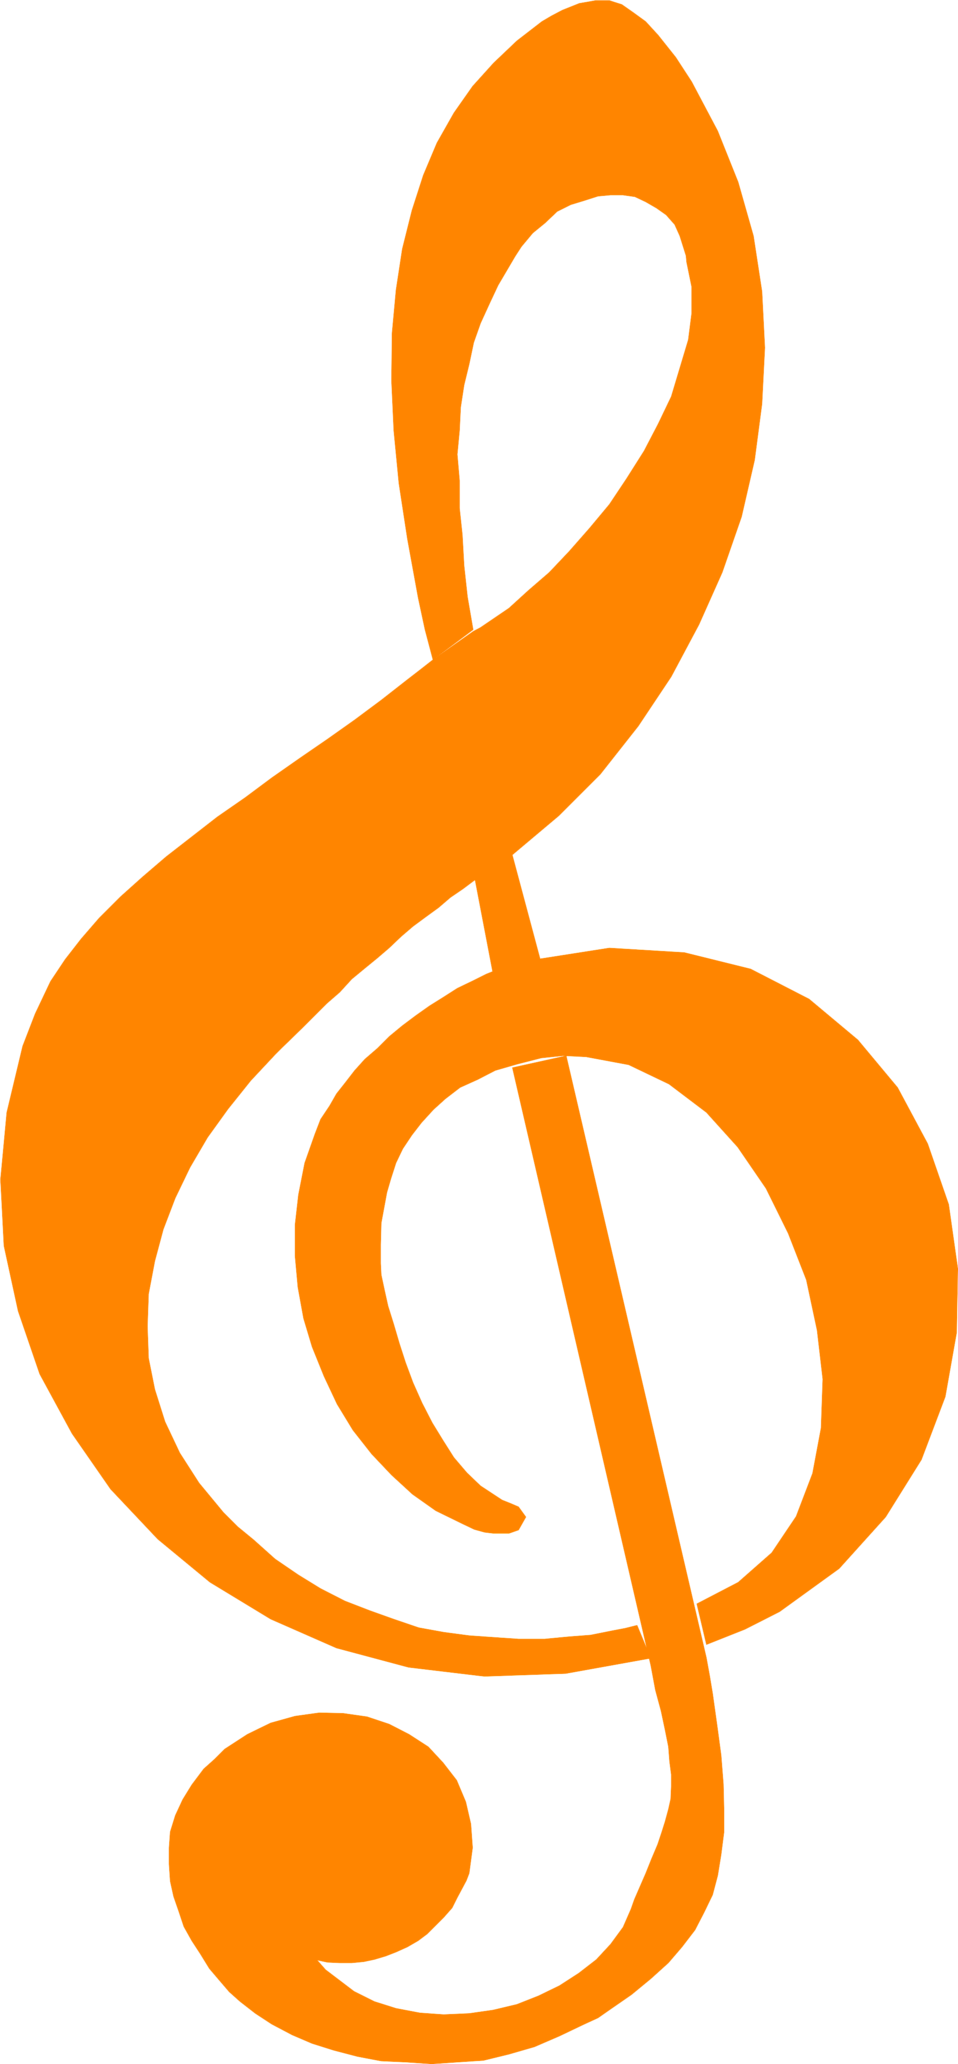 Treble clef free stock. Oranges clipart sticky note